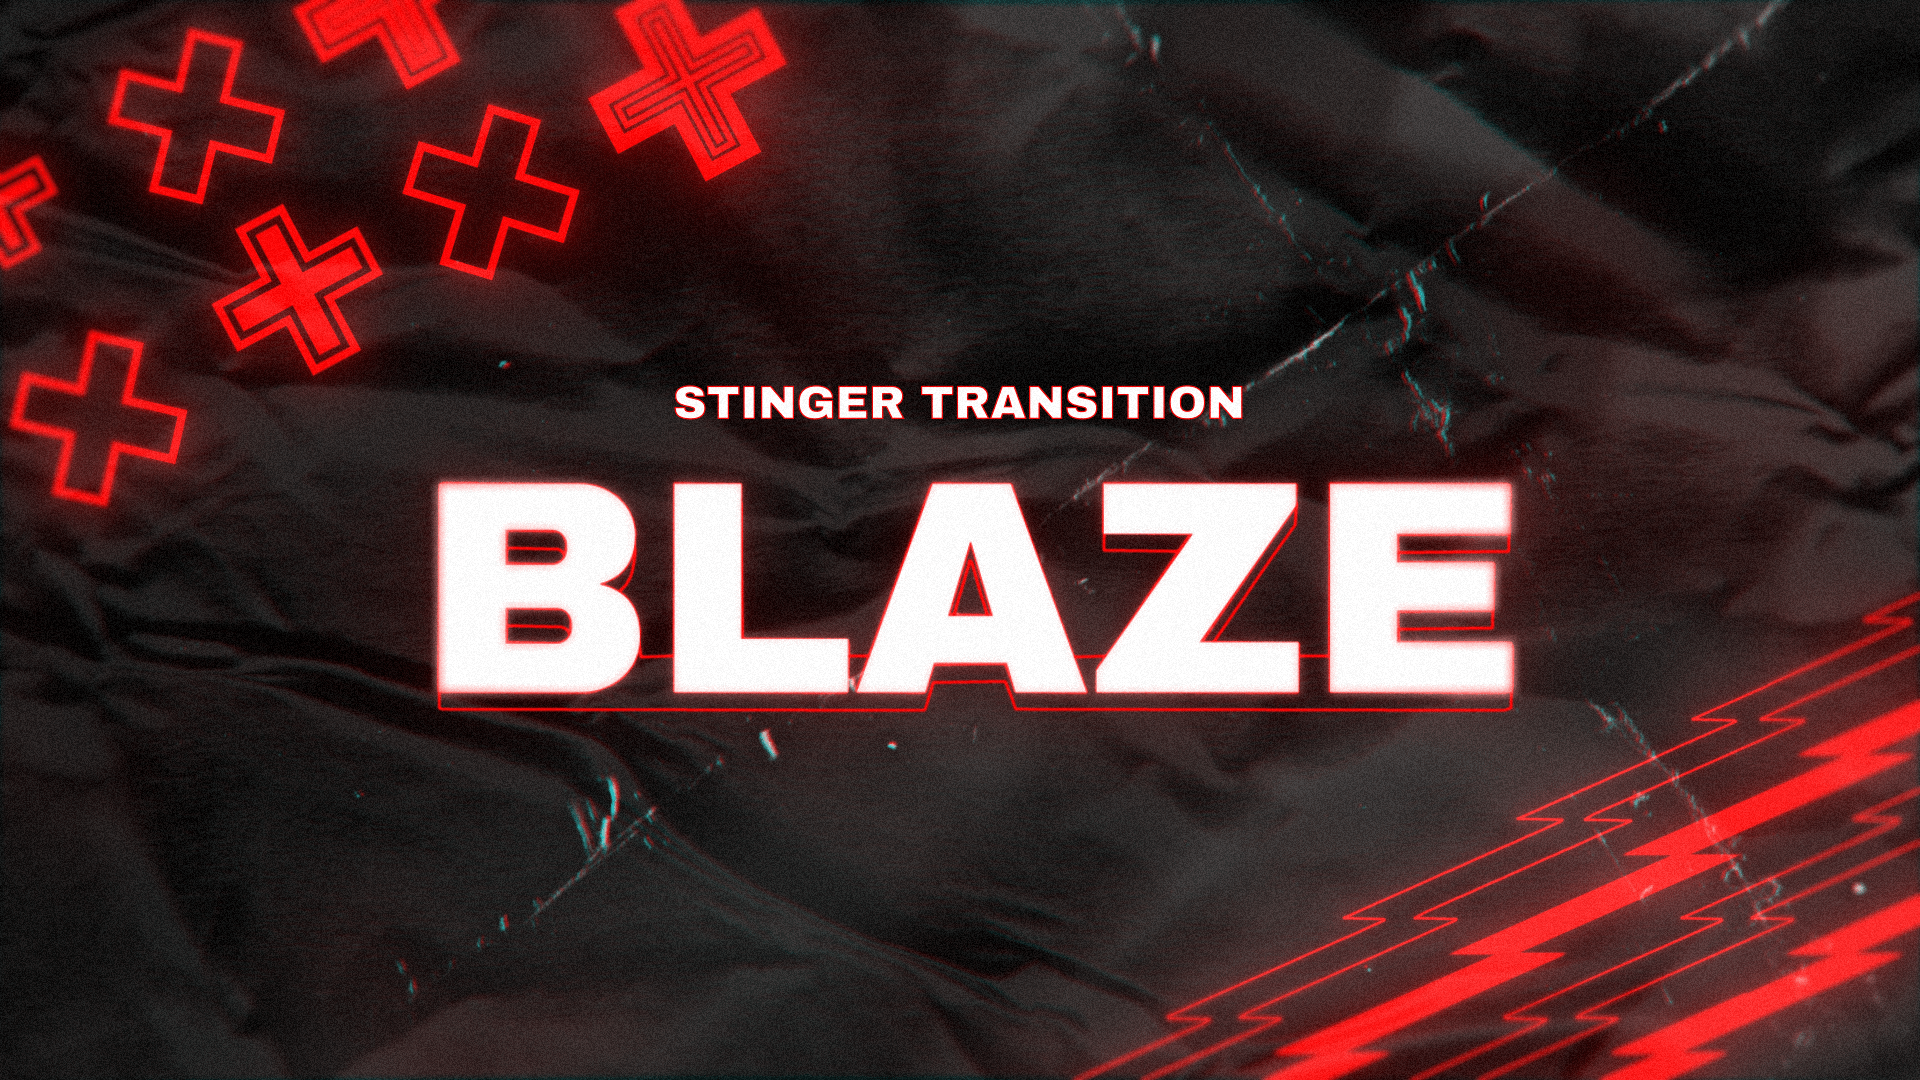 Blaze - Stinger Transition for Twitch, Youtube and Facebook